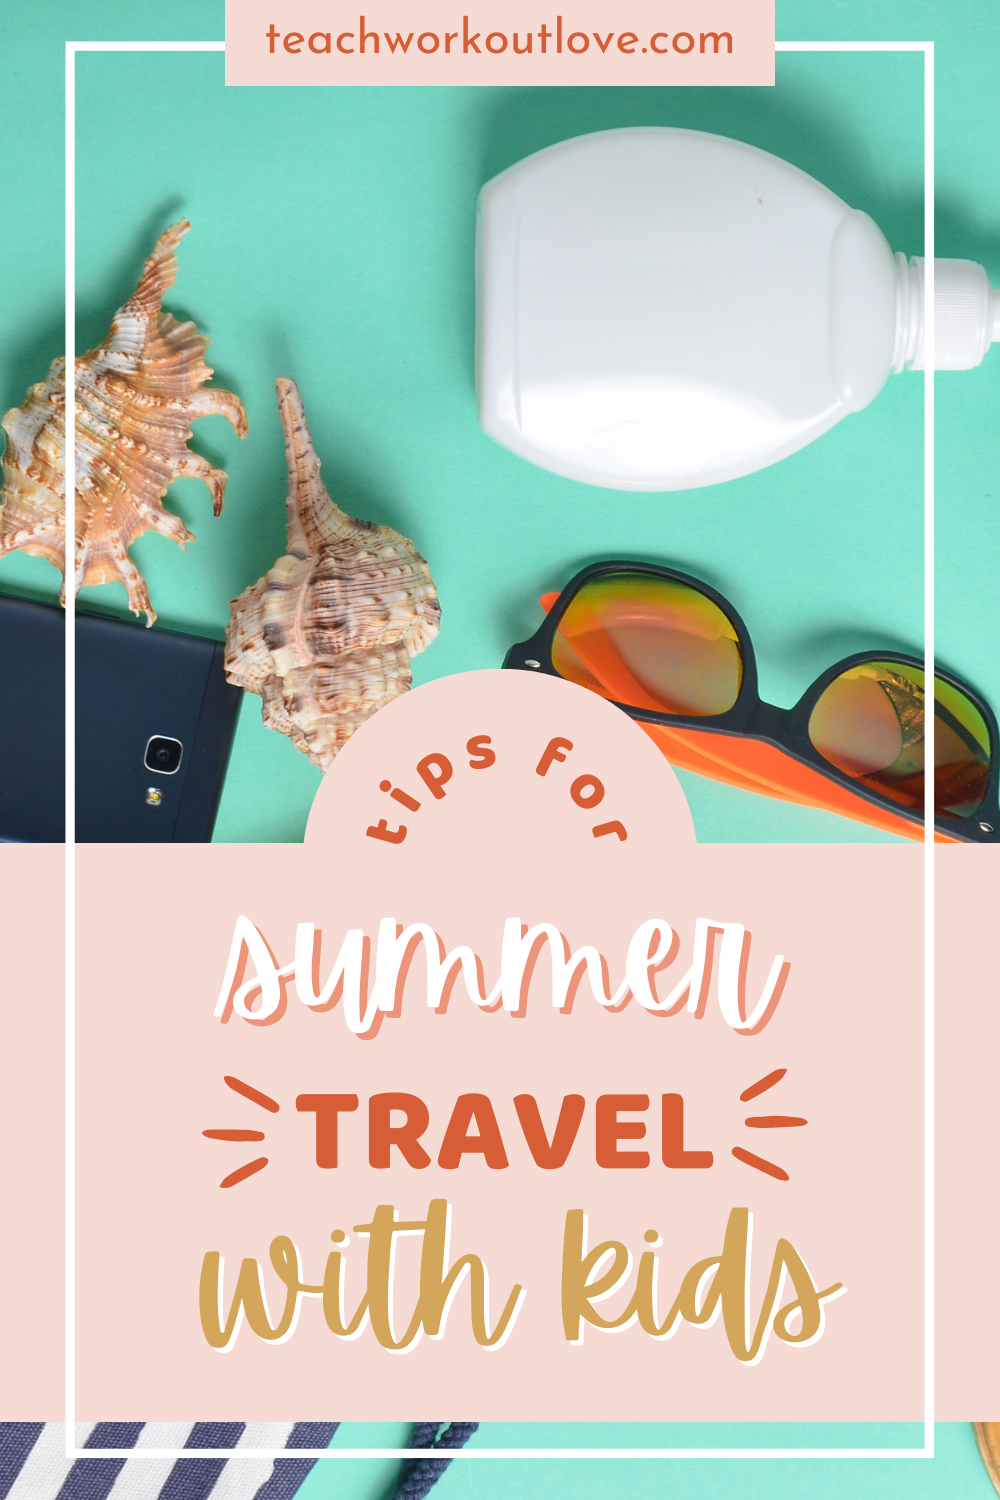 Traveling with kids is a different matter, and the younger they are, the more there is to think about. With that in mind, here are a few tips to help you with your summer travel plans if you have kids.